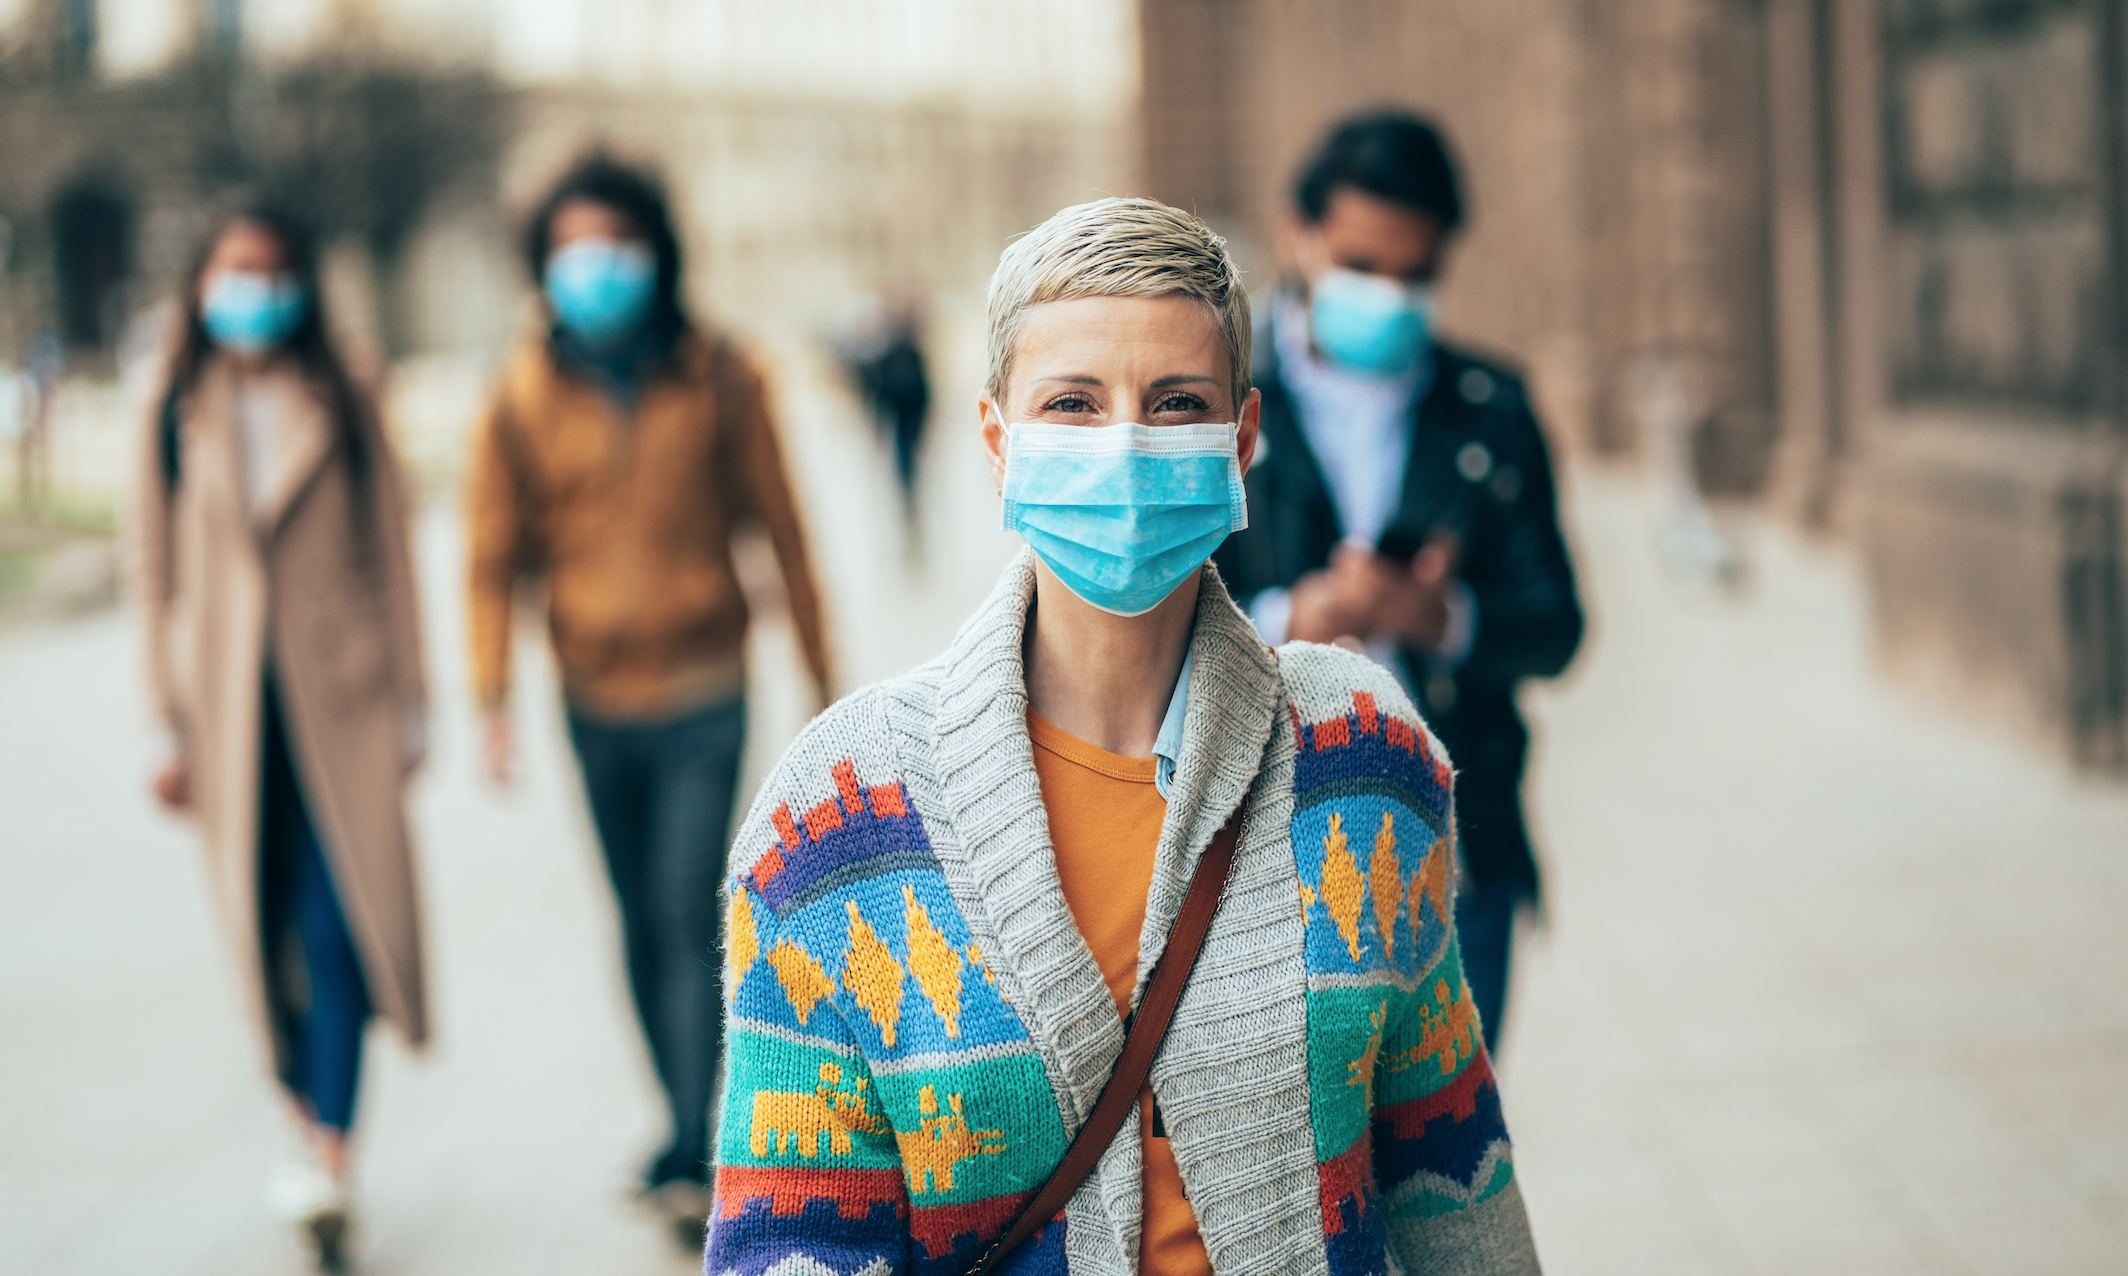 A woman is wearing a face mask on the sidewalk